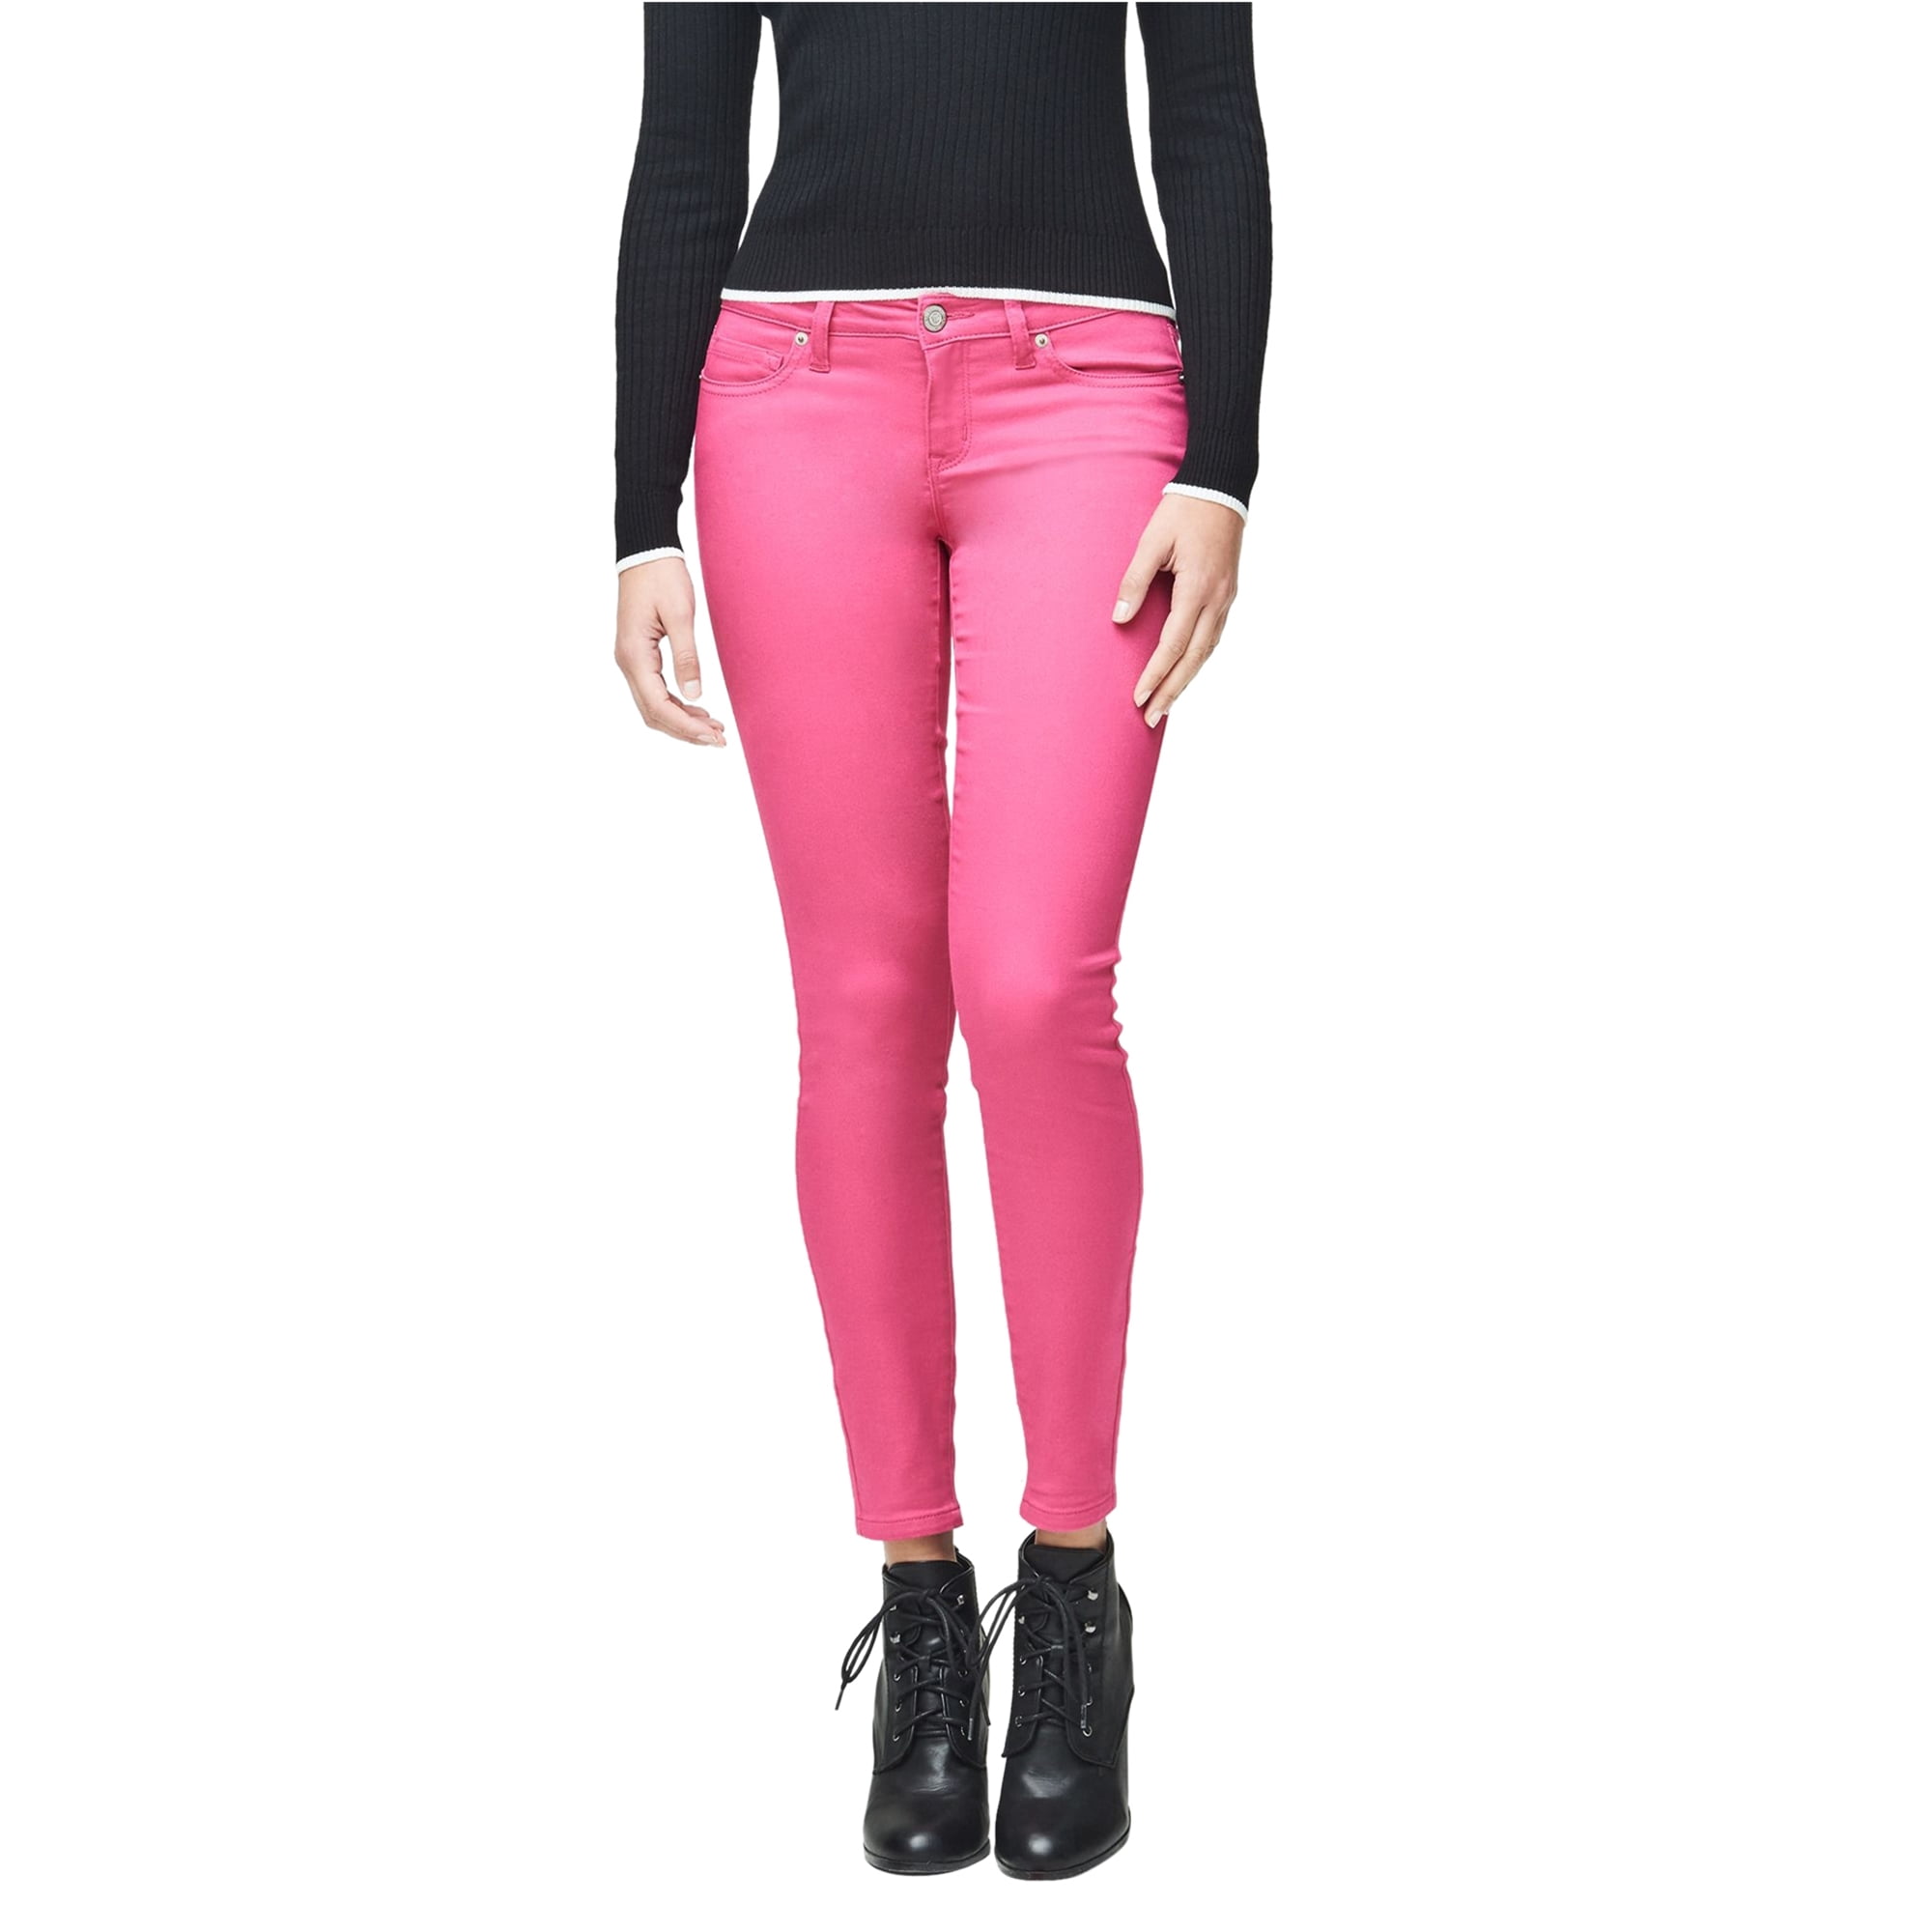 Aeropostale Womens Low-Rise Ankle Casual Leggings, Pink, 10